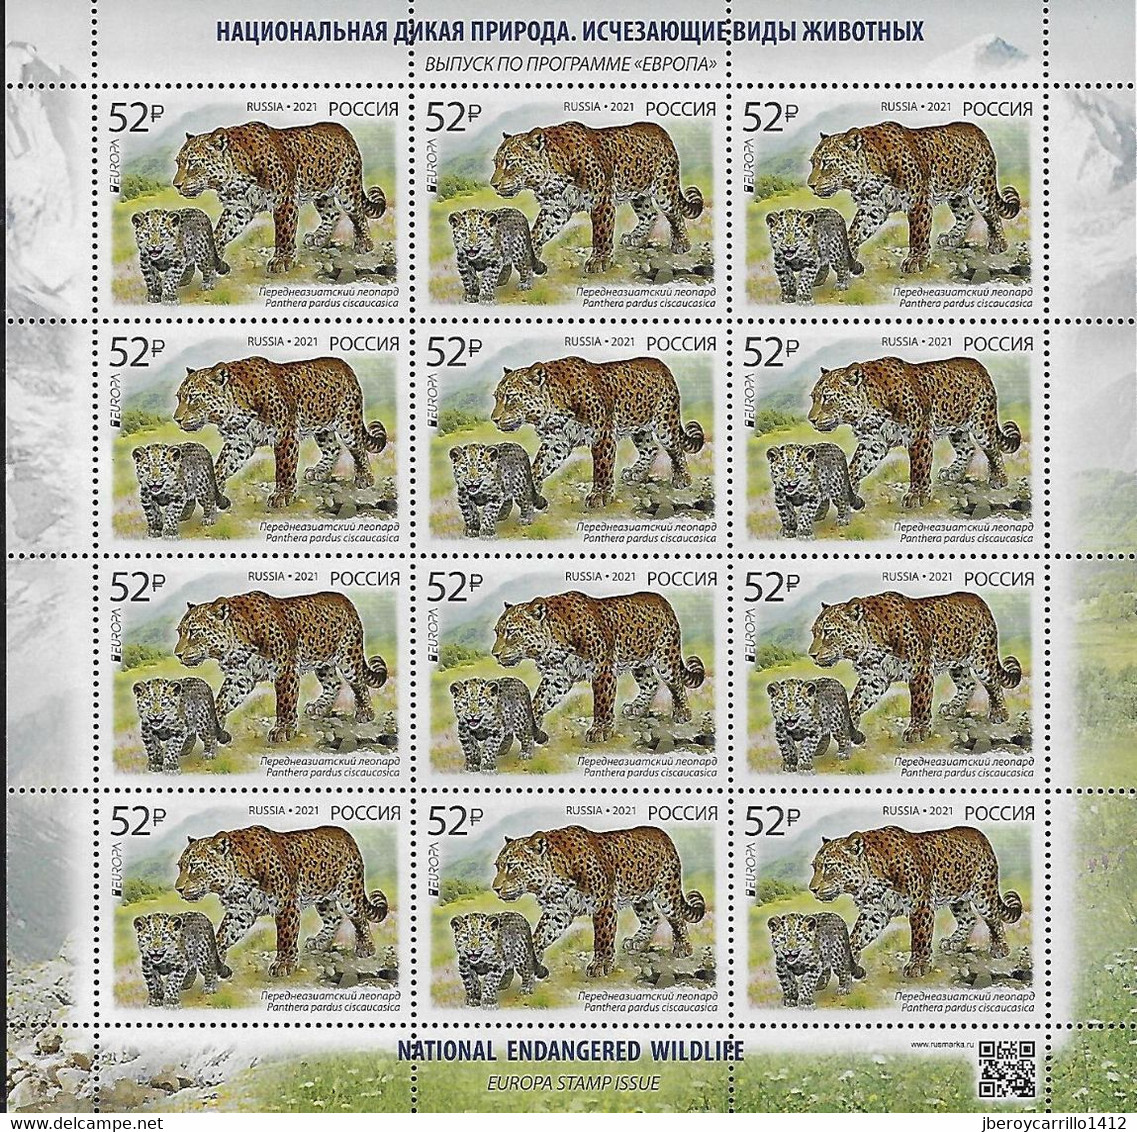 RUSIA 2021 /RUSSLAND /RUSSIA - EUROPA 2021 -"NATIONAL ENDANGERED WILDLIFE"- LEOPARD (PANTHERA).- SHEEET Of 12 Stamps MNH - 2021